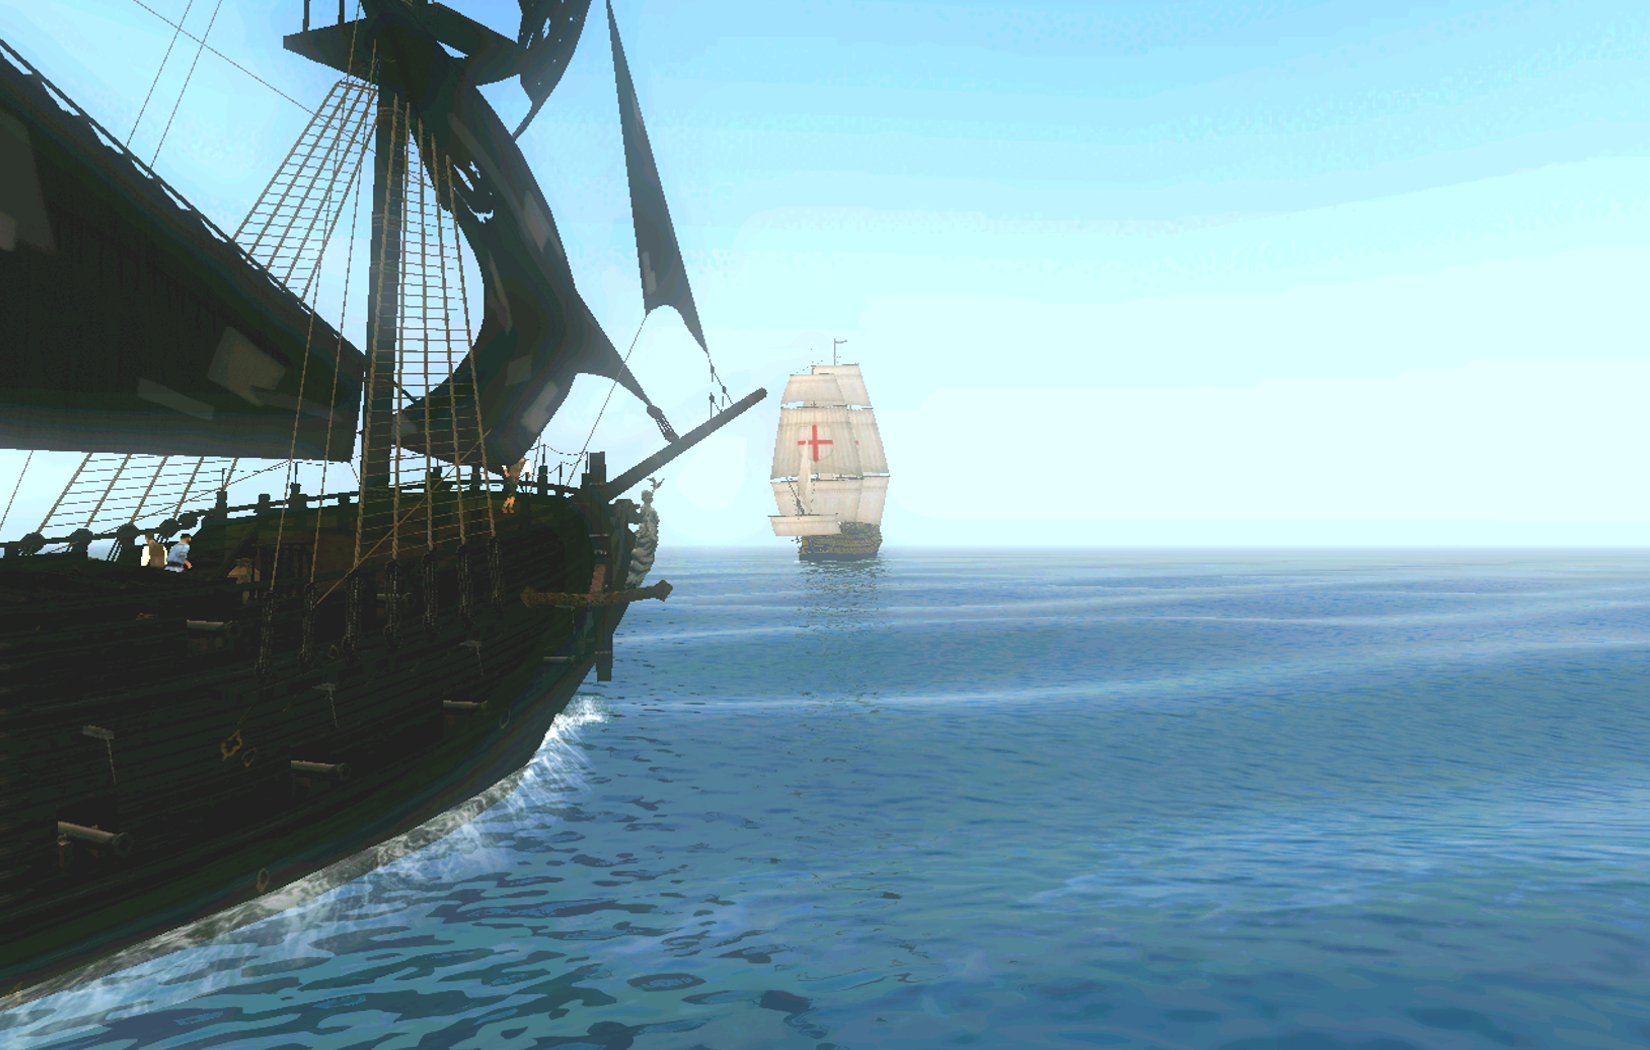 empire total war pirates of the caribbean mod